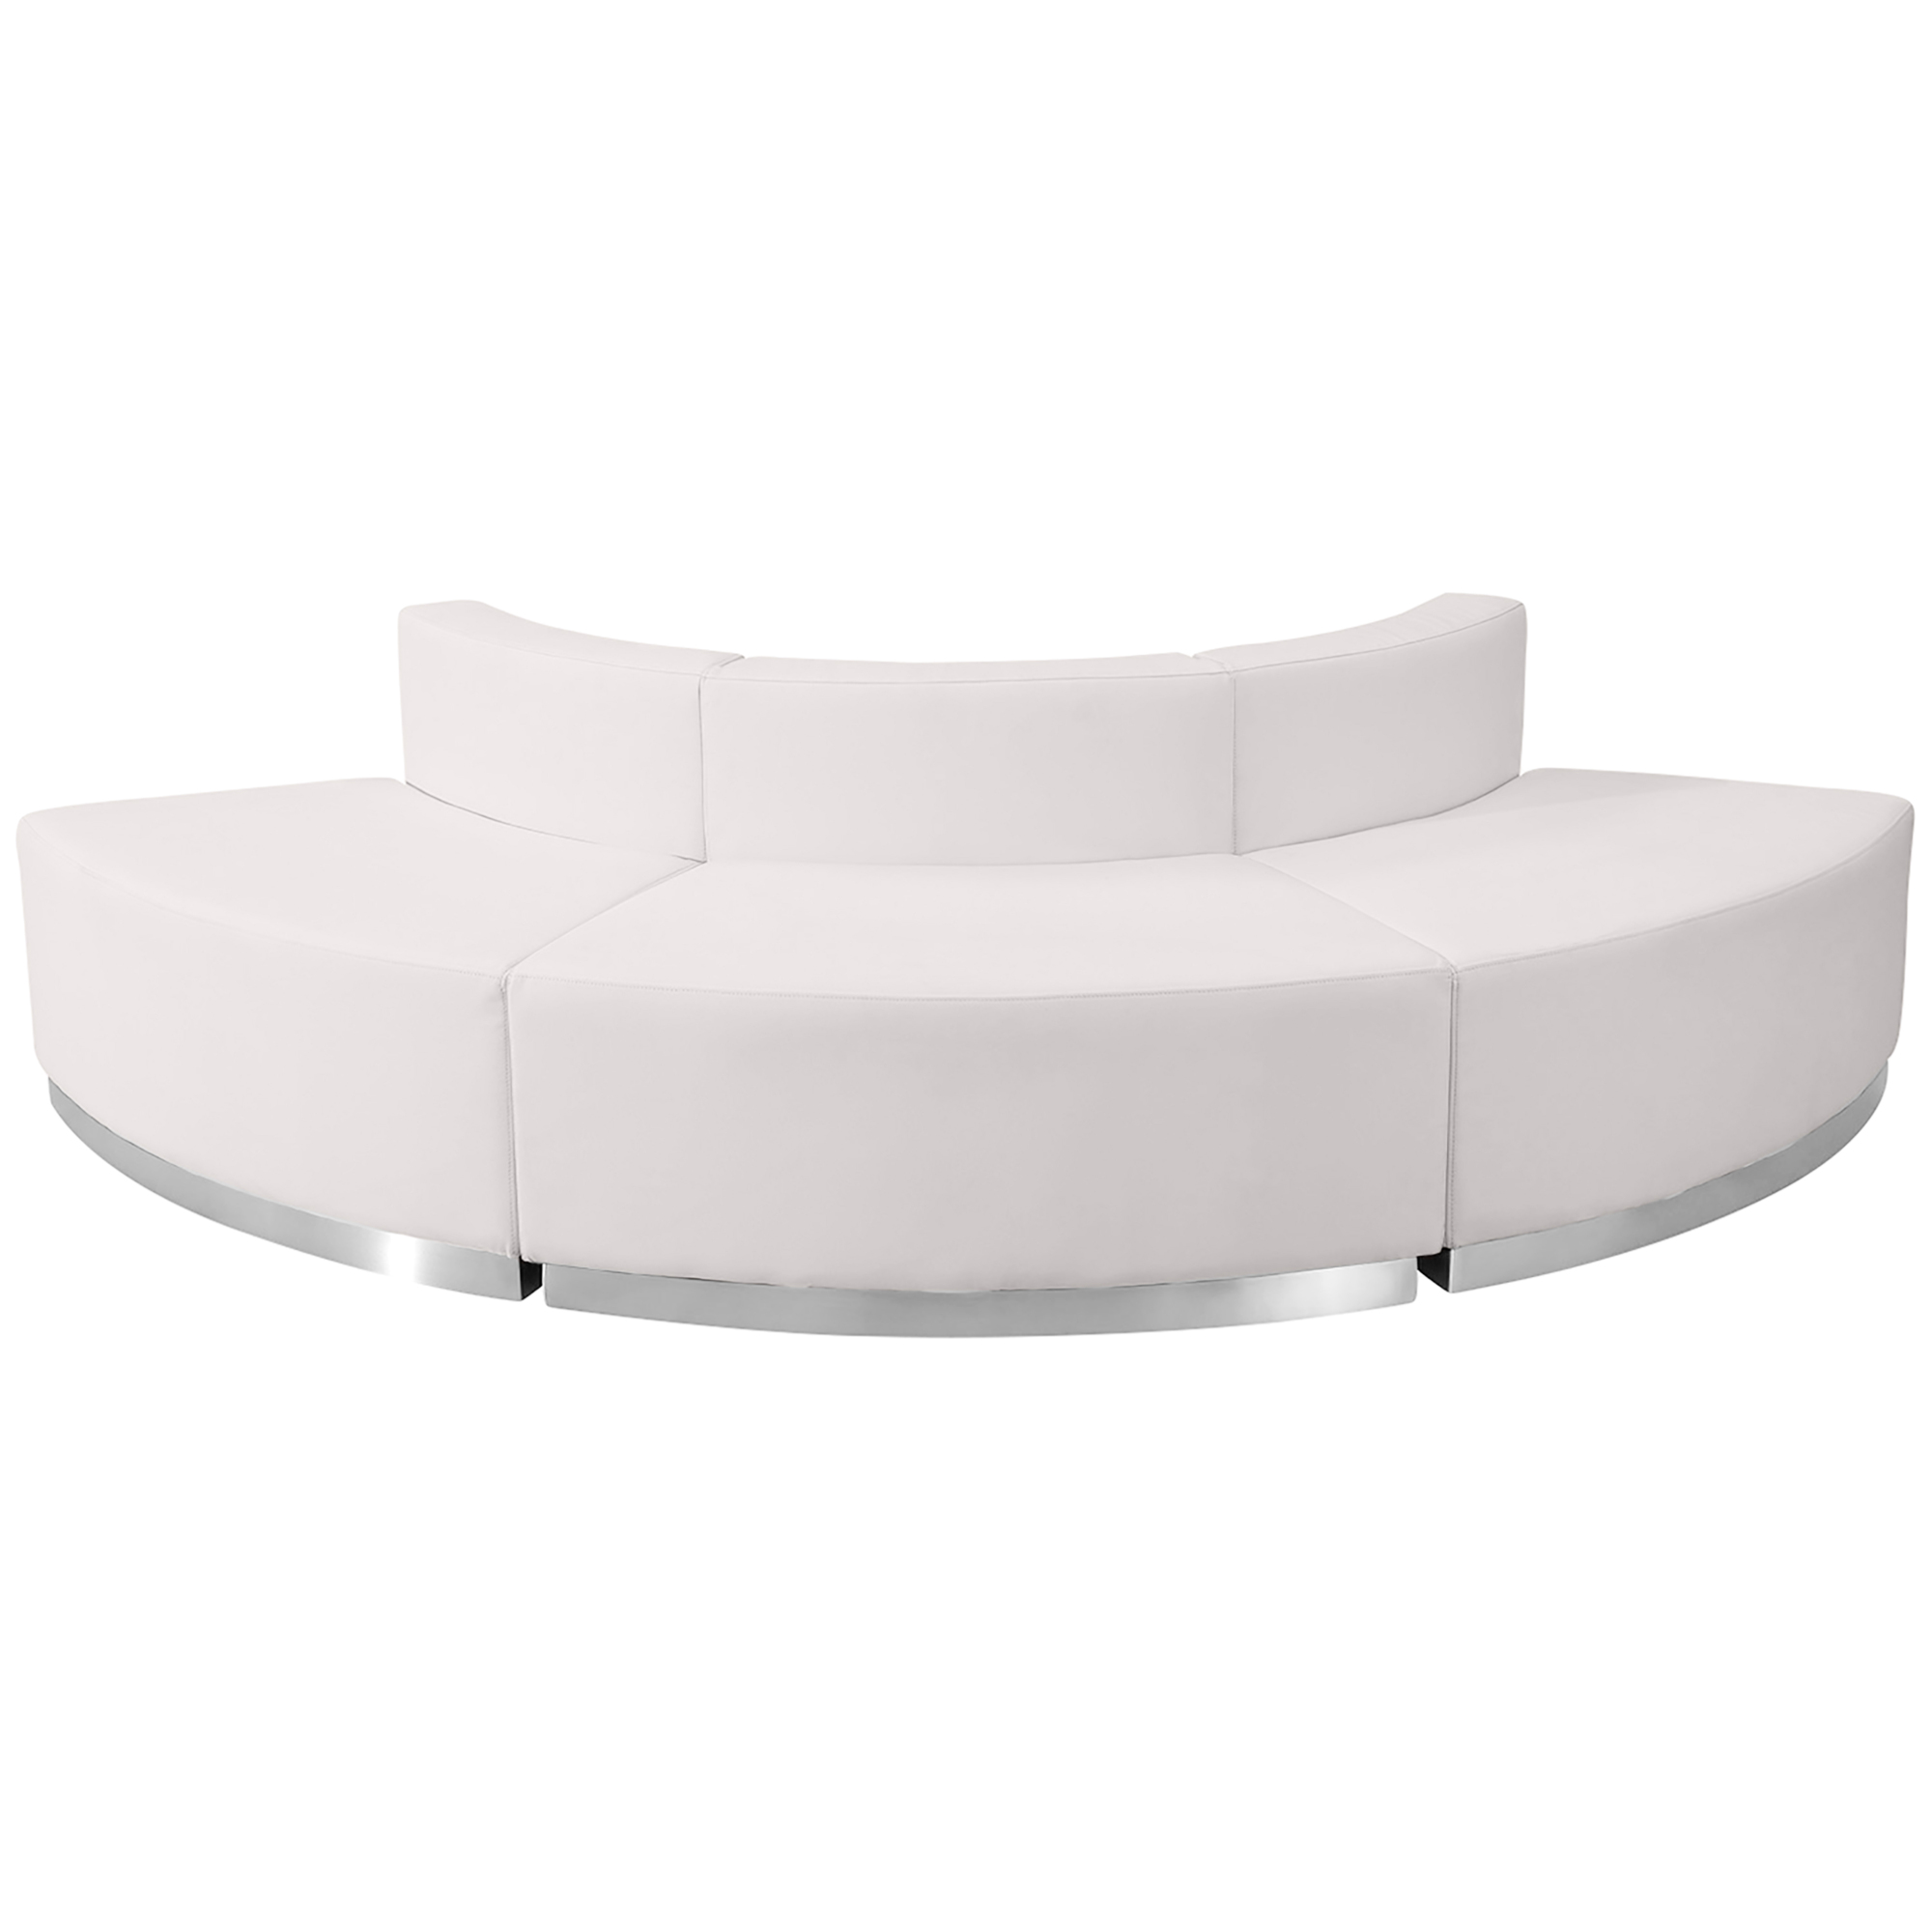 Flash Furniture, 3 PC White LeatherSoft Reception Configuration, Primary Color White, Included (qty.) 3, Model ZB803800SWH